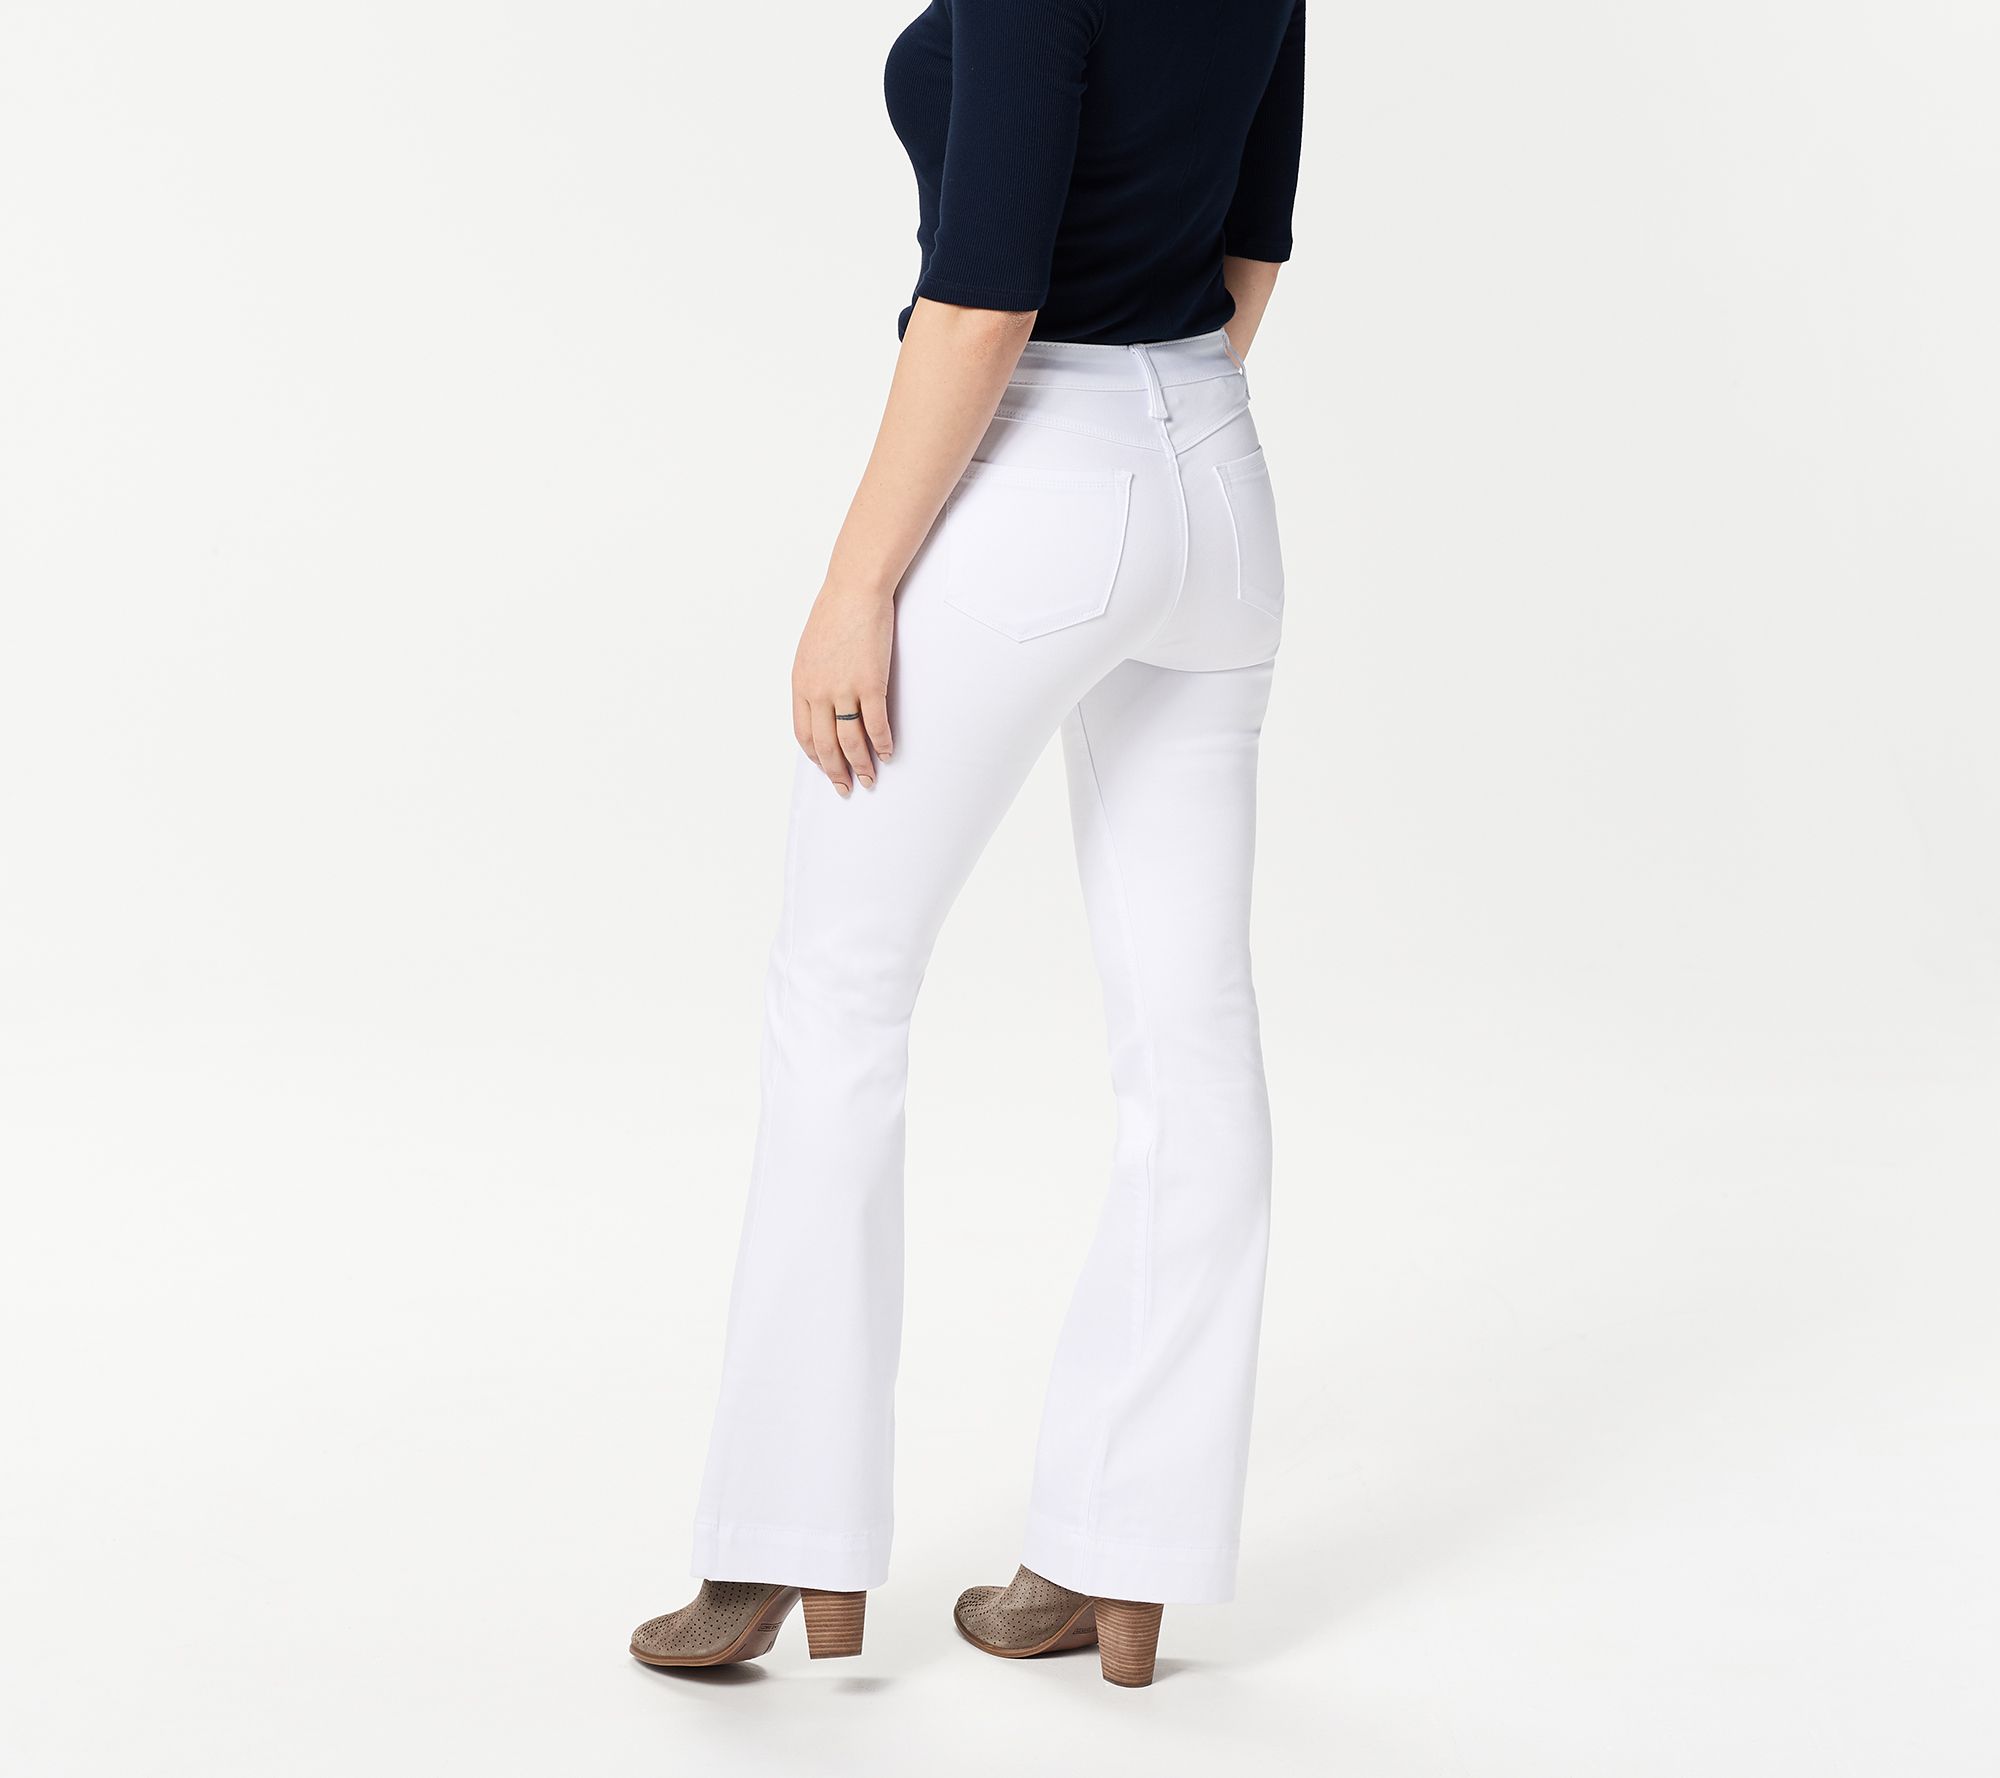 Laurie Felt Tall Color Silky Denim Flare Pull-On Jeans - QVC.com